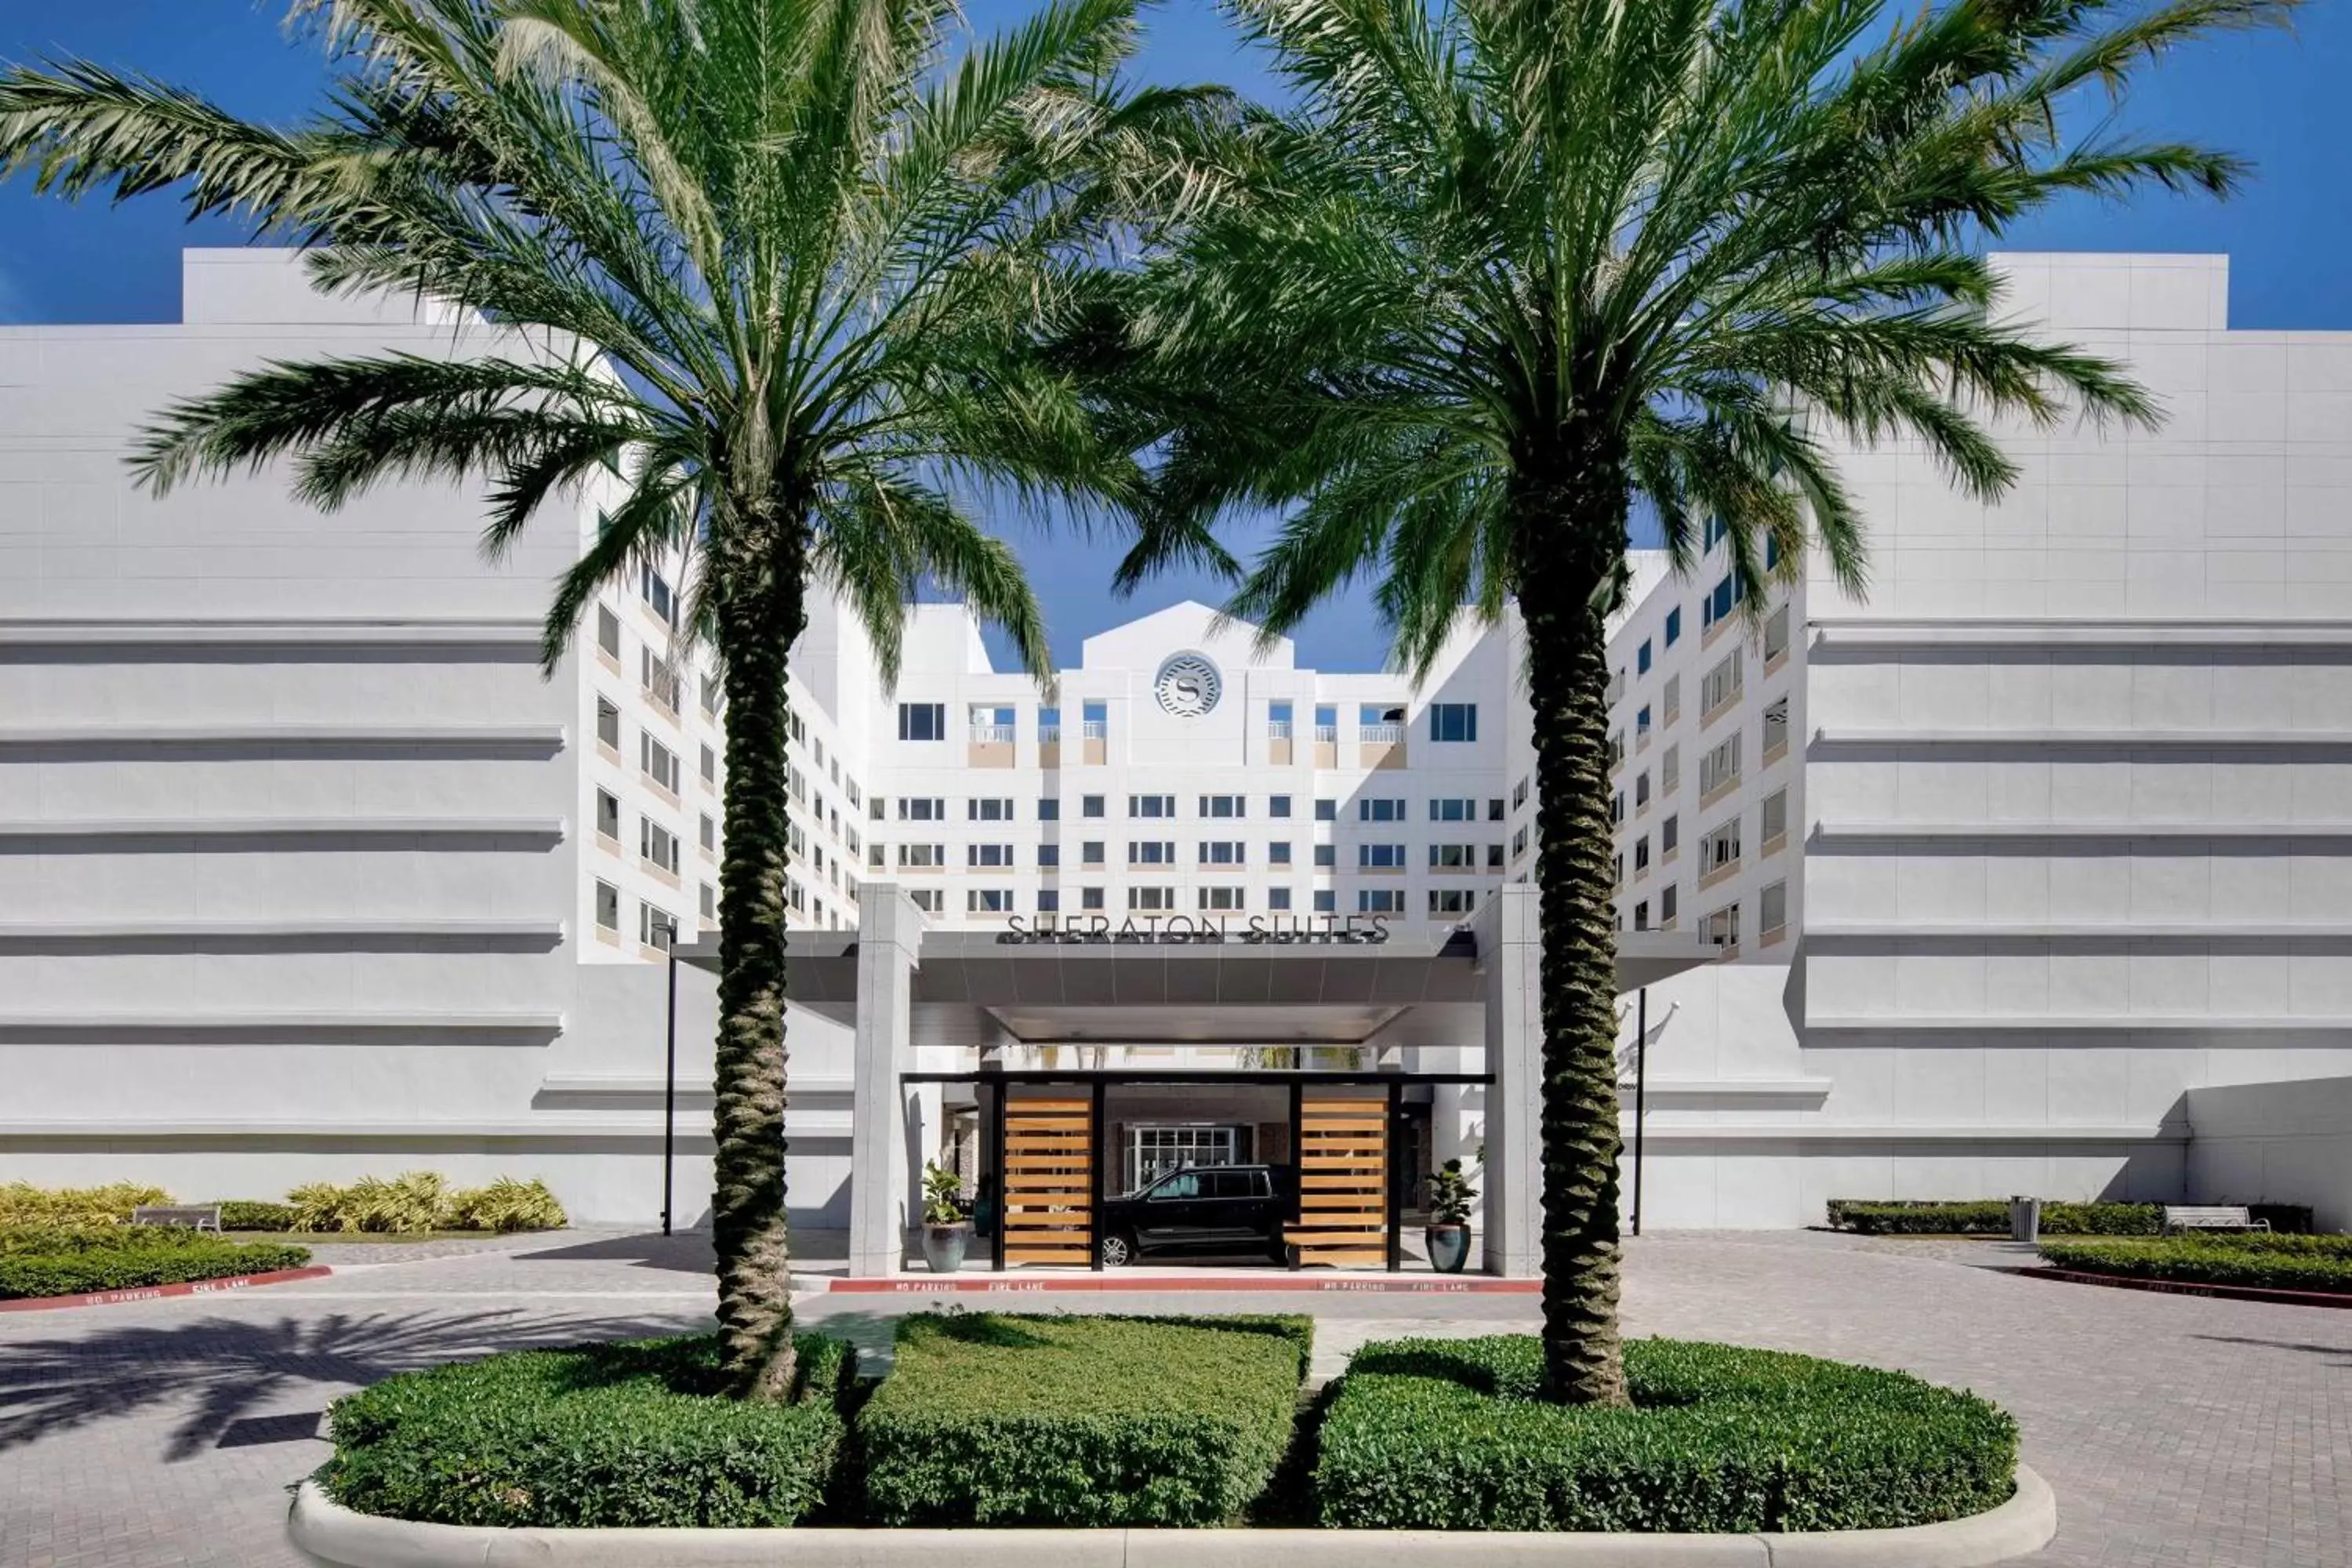 Property Building in Sheraton Suites Fort Lauderdale Plantation